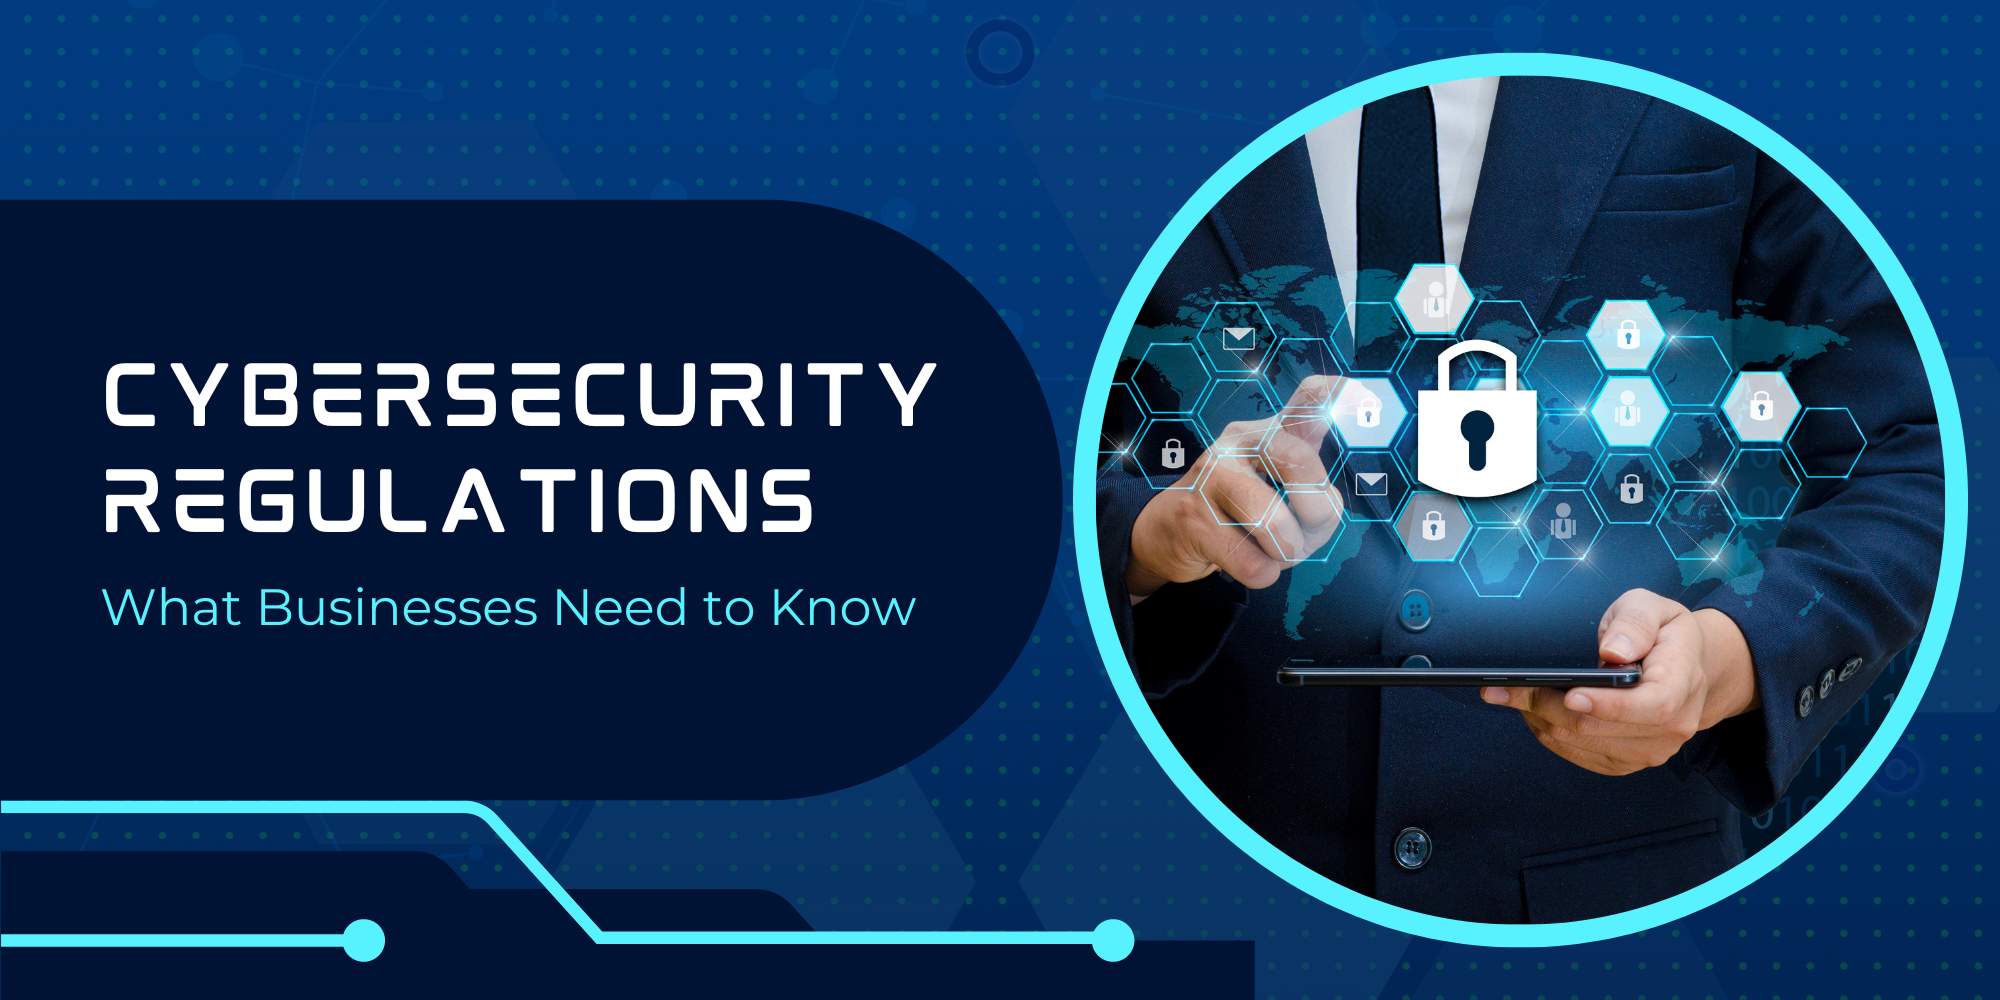 cybersecurity regulations what businesses need to know